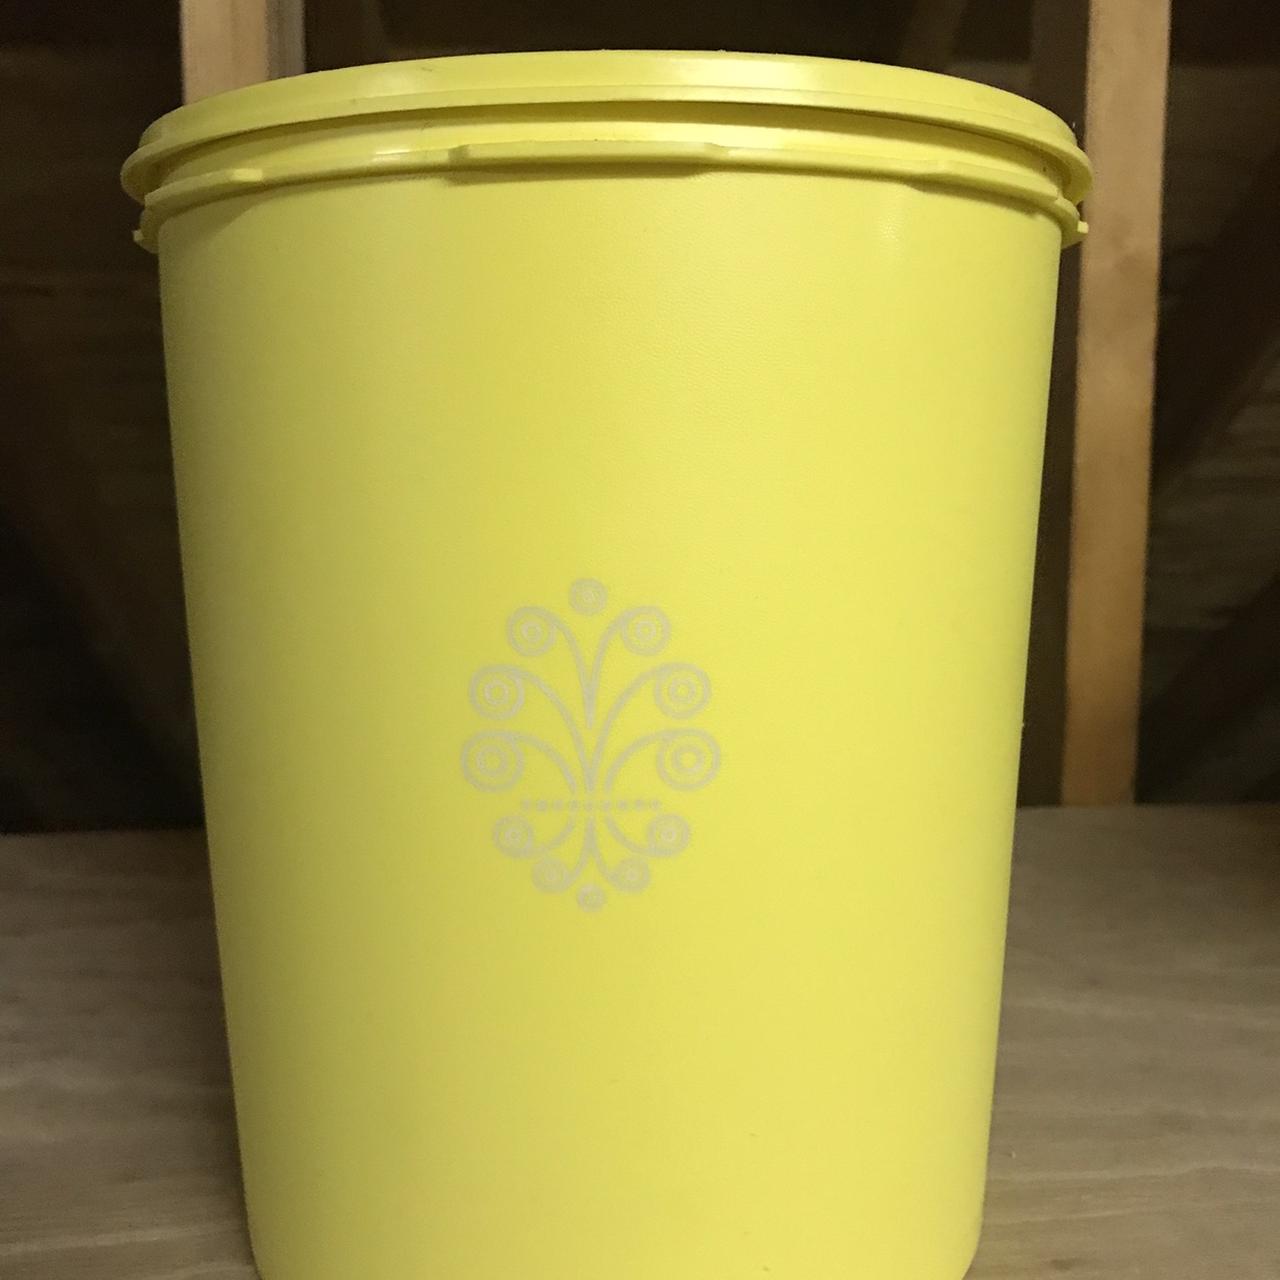 Tupperware canisters